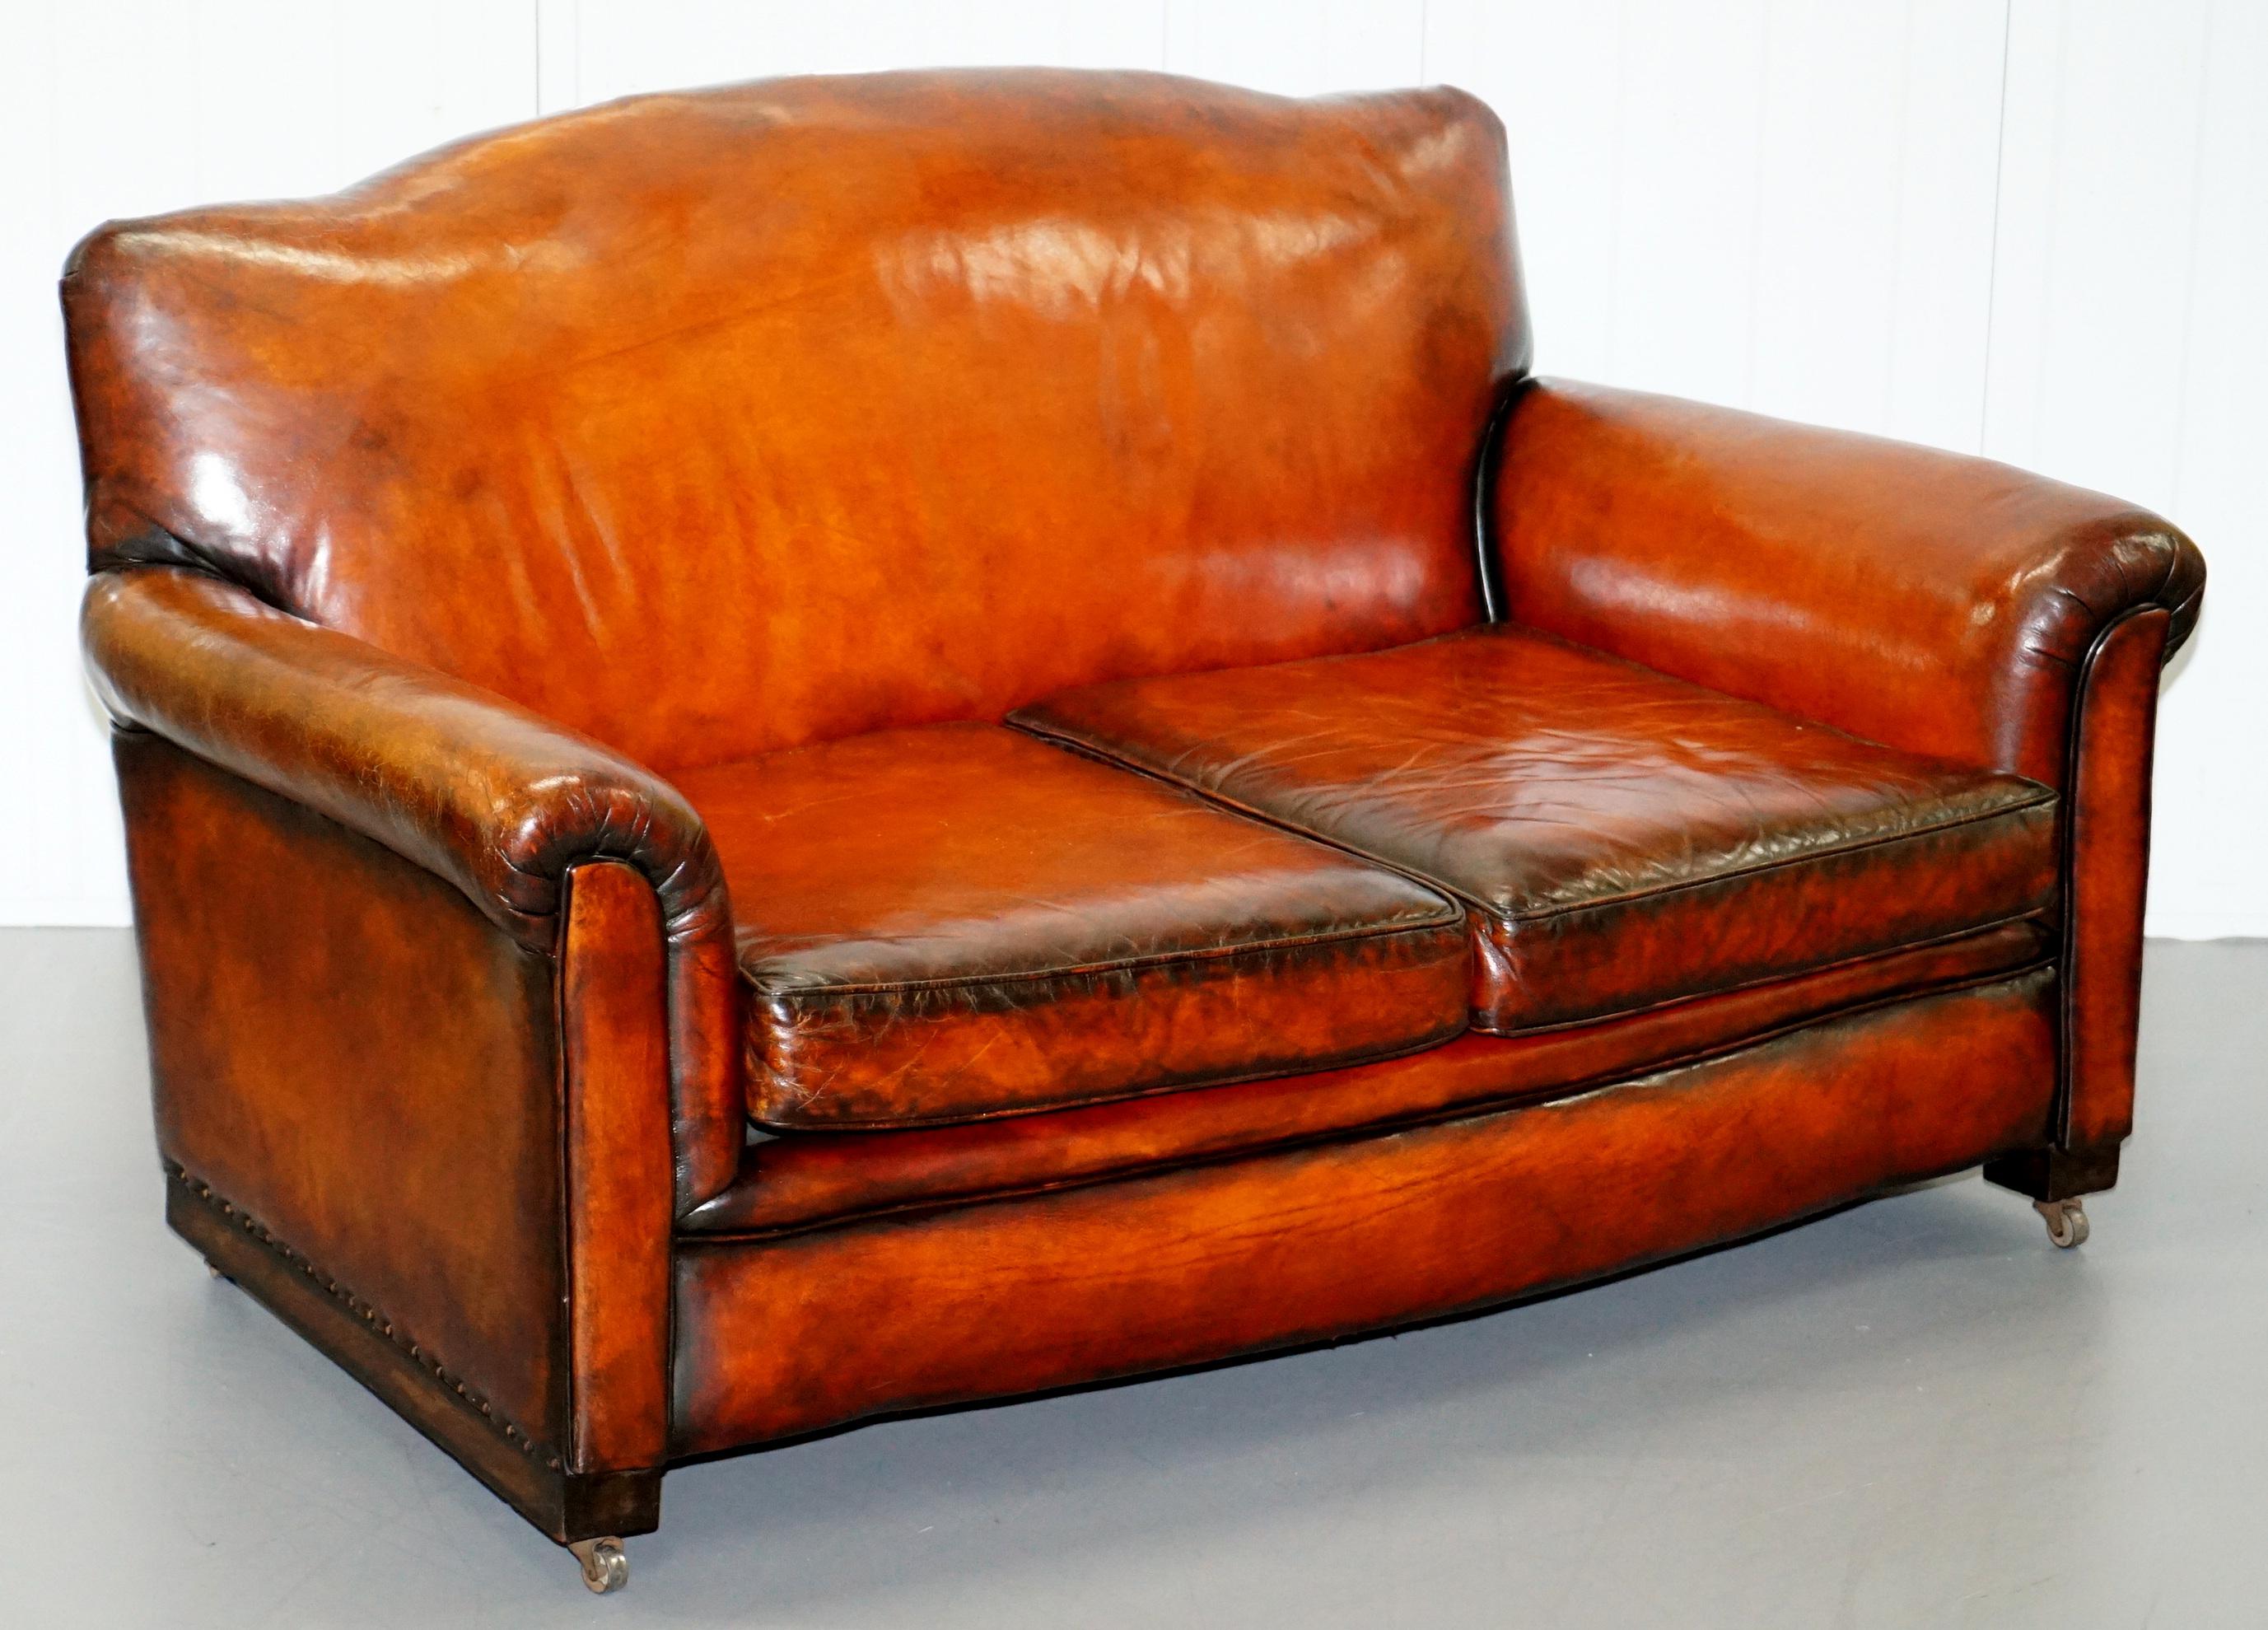 We are delighted to this stunning original circa 1900 fully restored hand dyed whisky brown leather sofa and armchairs suite

A stunning set that has been restored to a very high standard indeed. The suite has been upholstered with natural fully